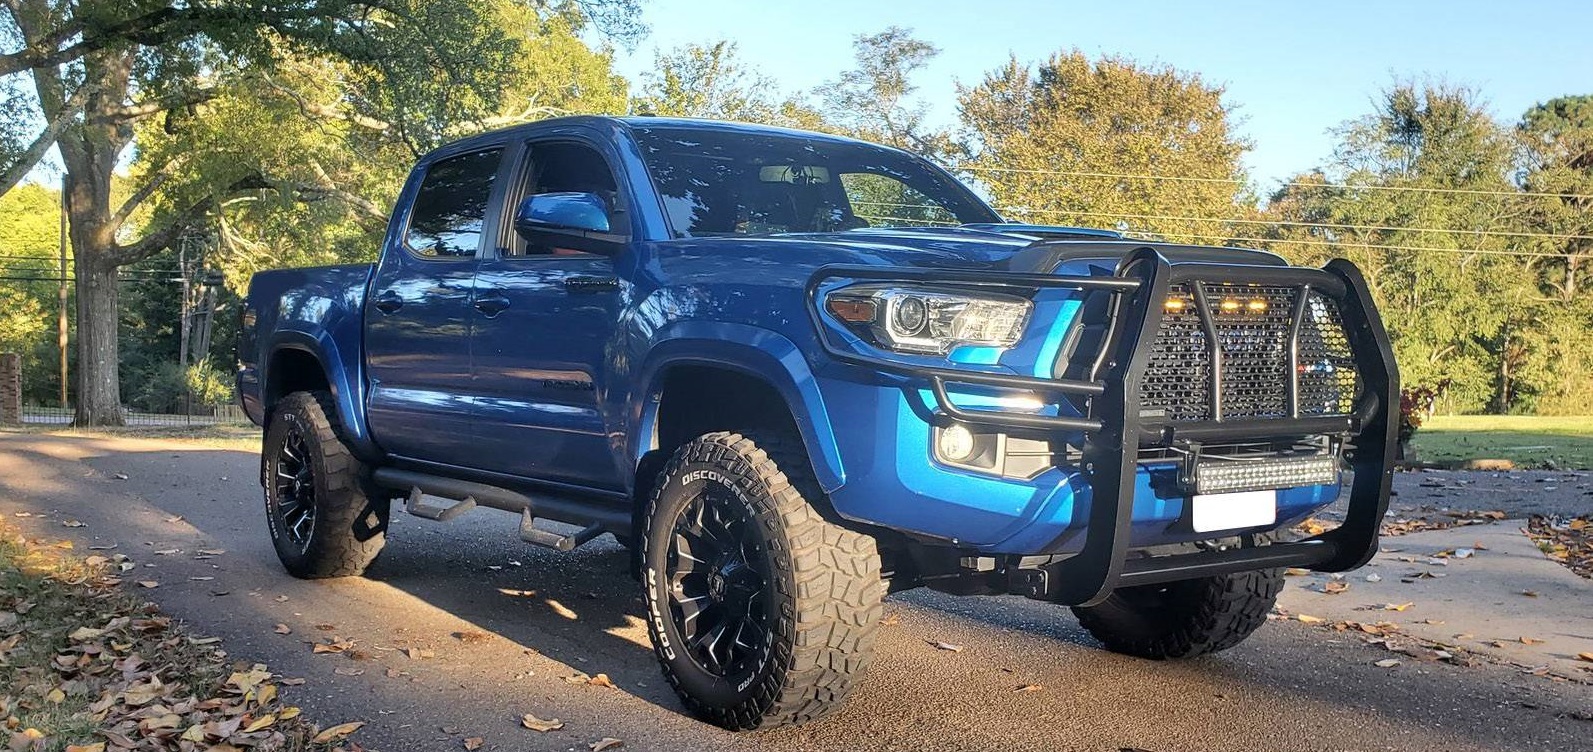 How does it look on my tacoma